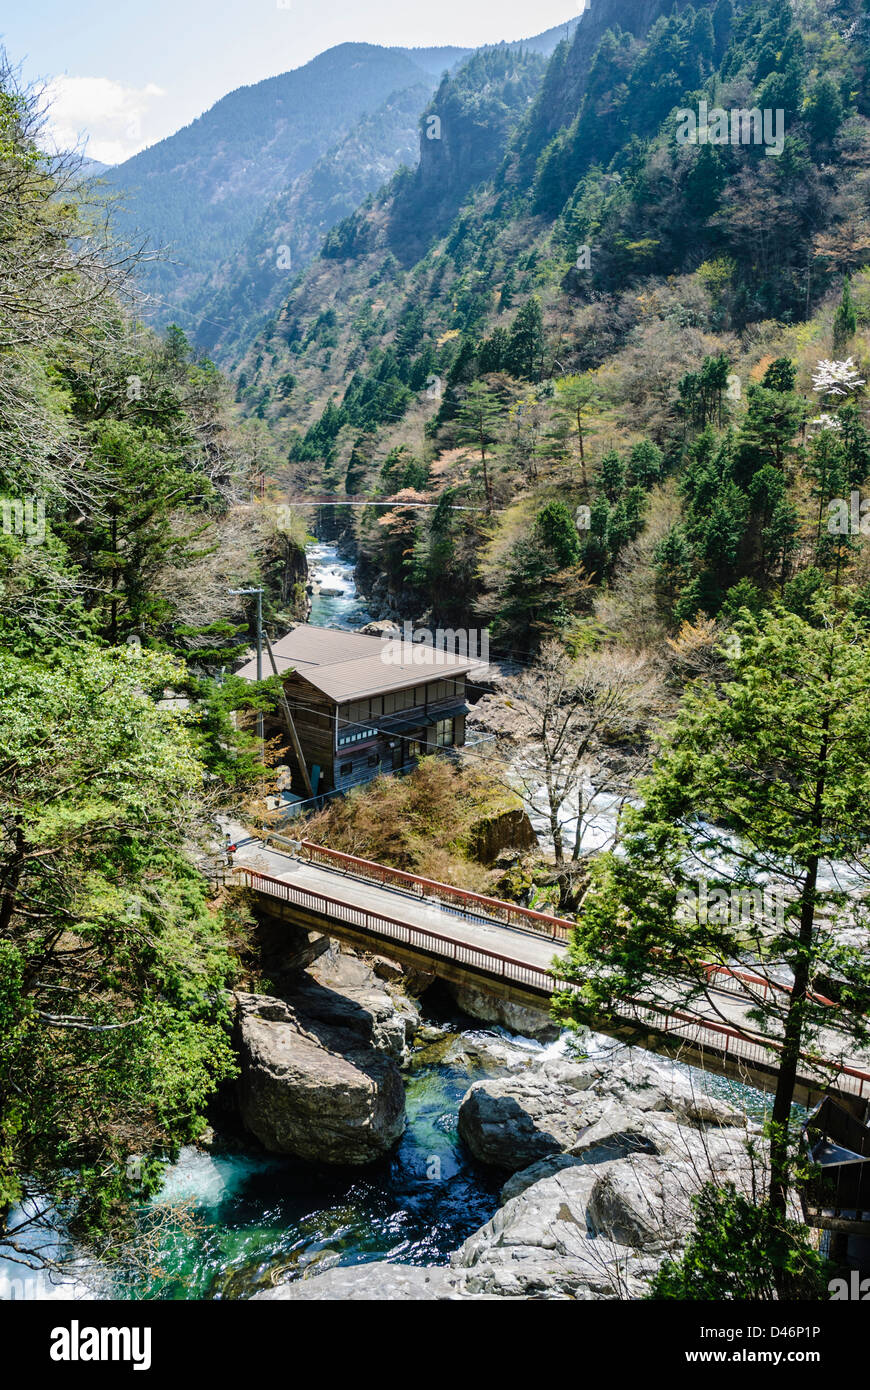 Steep valley with stream, bridge and buildings in the rural heartland of Central Japan. Stock Photo